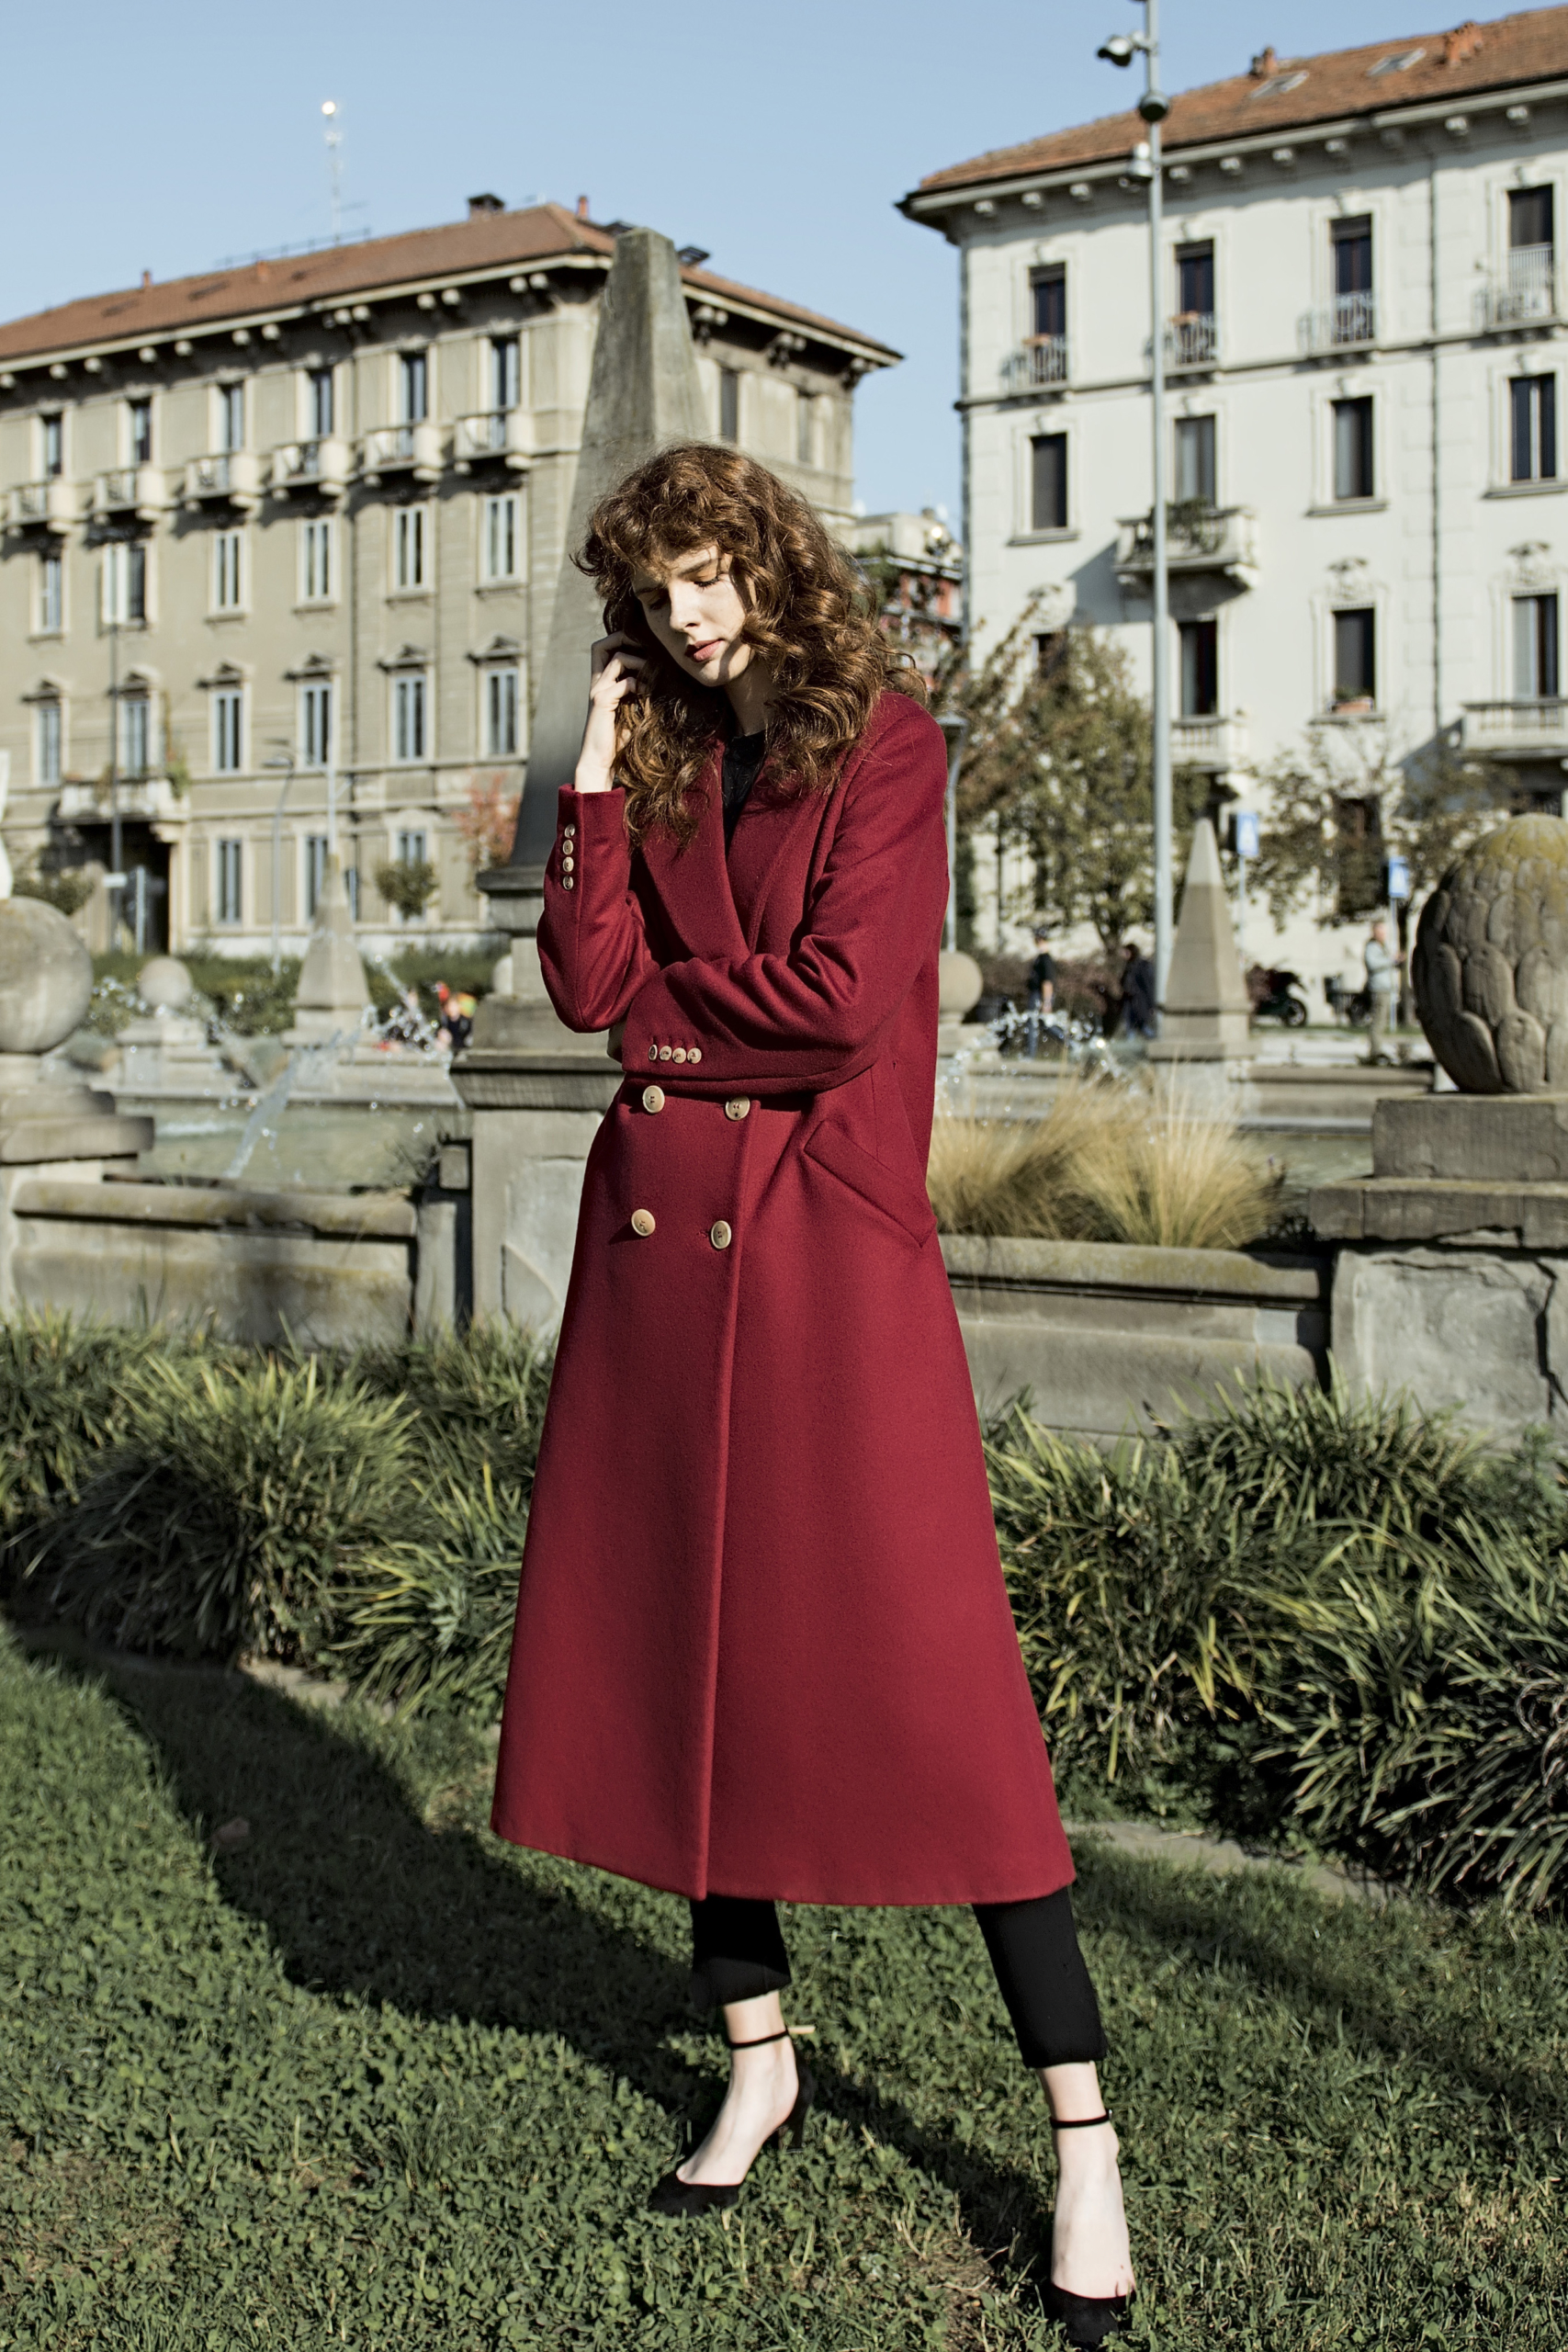 Elegant le Rú Diana coat in red, crafted from a blend of virgin wool and cashmere, showcased by a model in an outdoor setting, embodying a timeless design.